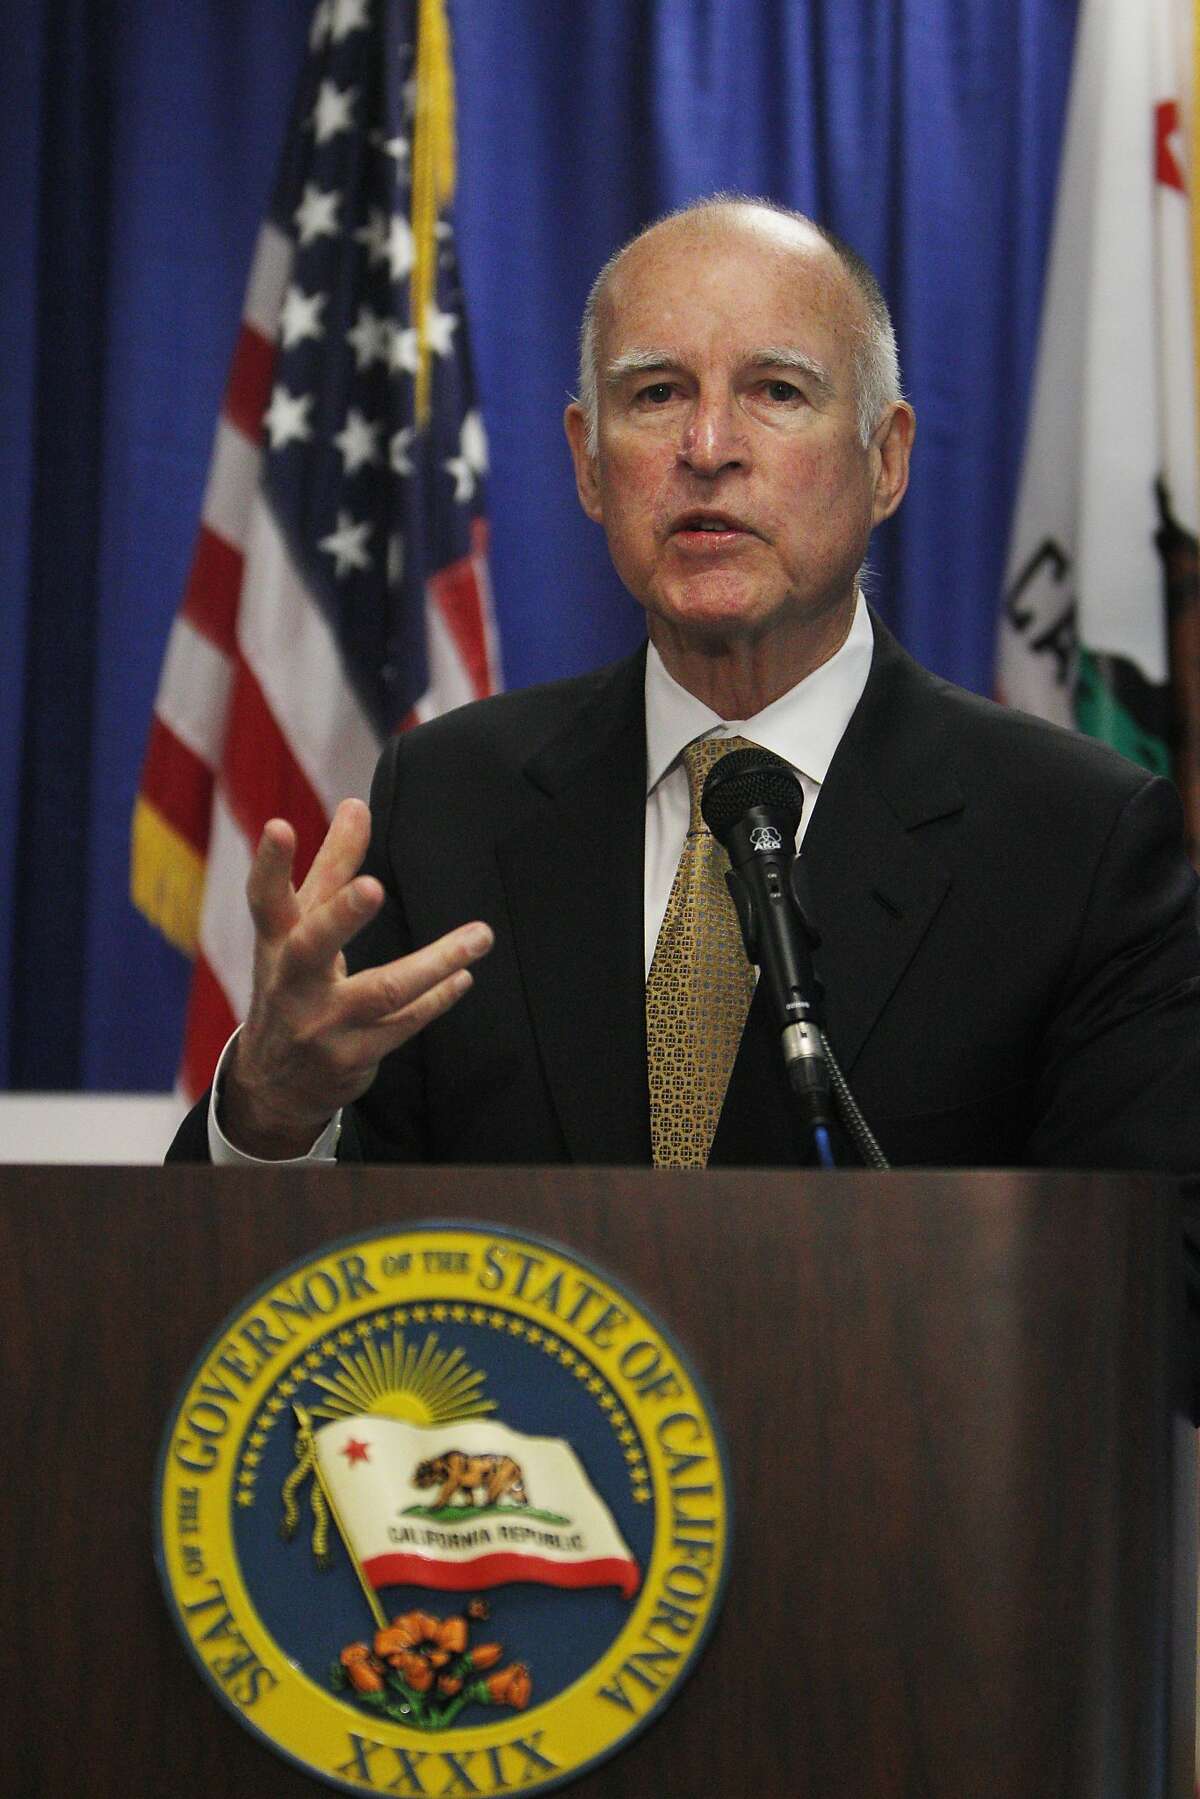 California Governor Jerry Brown speaks during a press conference where he declared a drought State of Emergency in San Francisco.